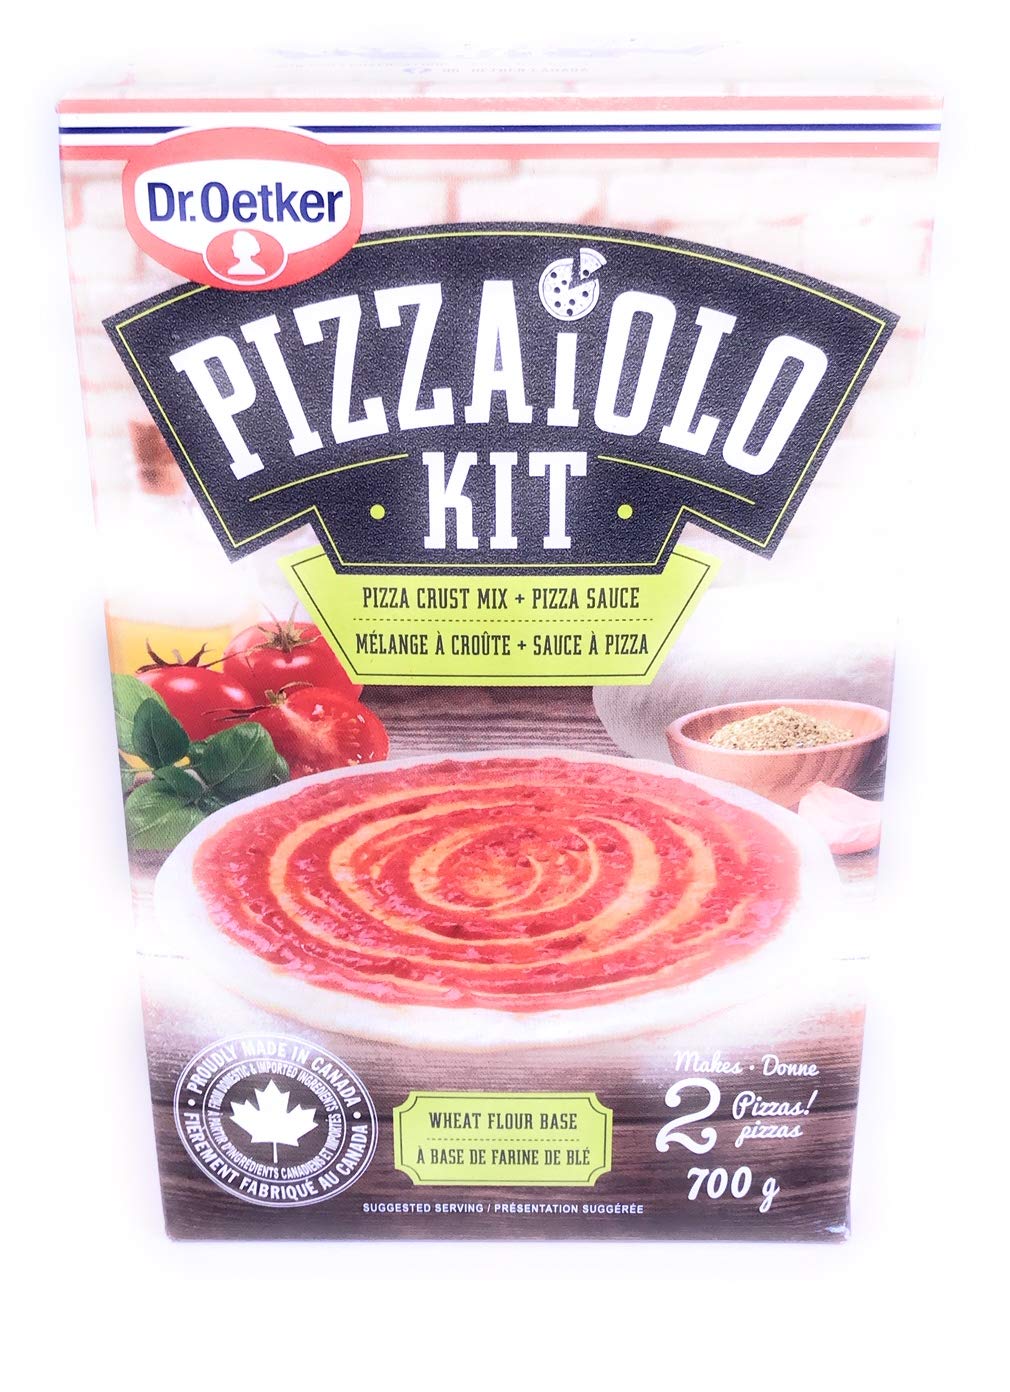 Dr. Oetker Pizzaiolo Kit 700g/24.7 oz {Imported from Canada} eBay